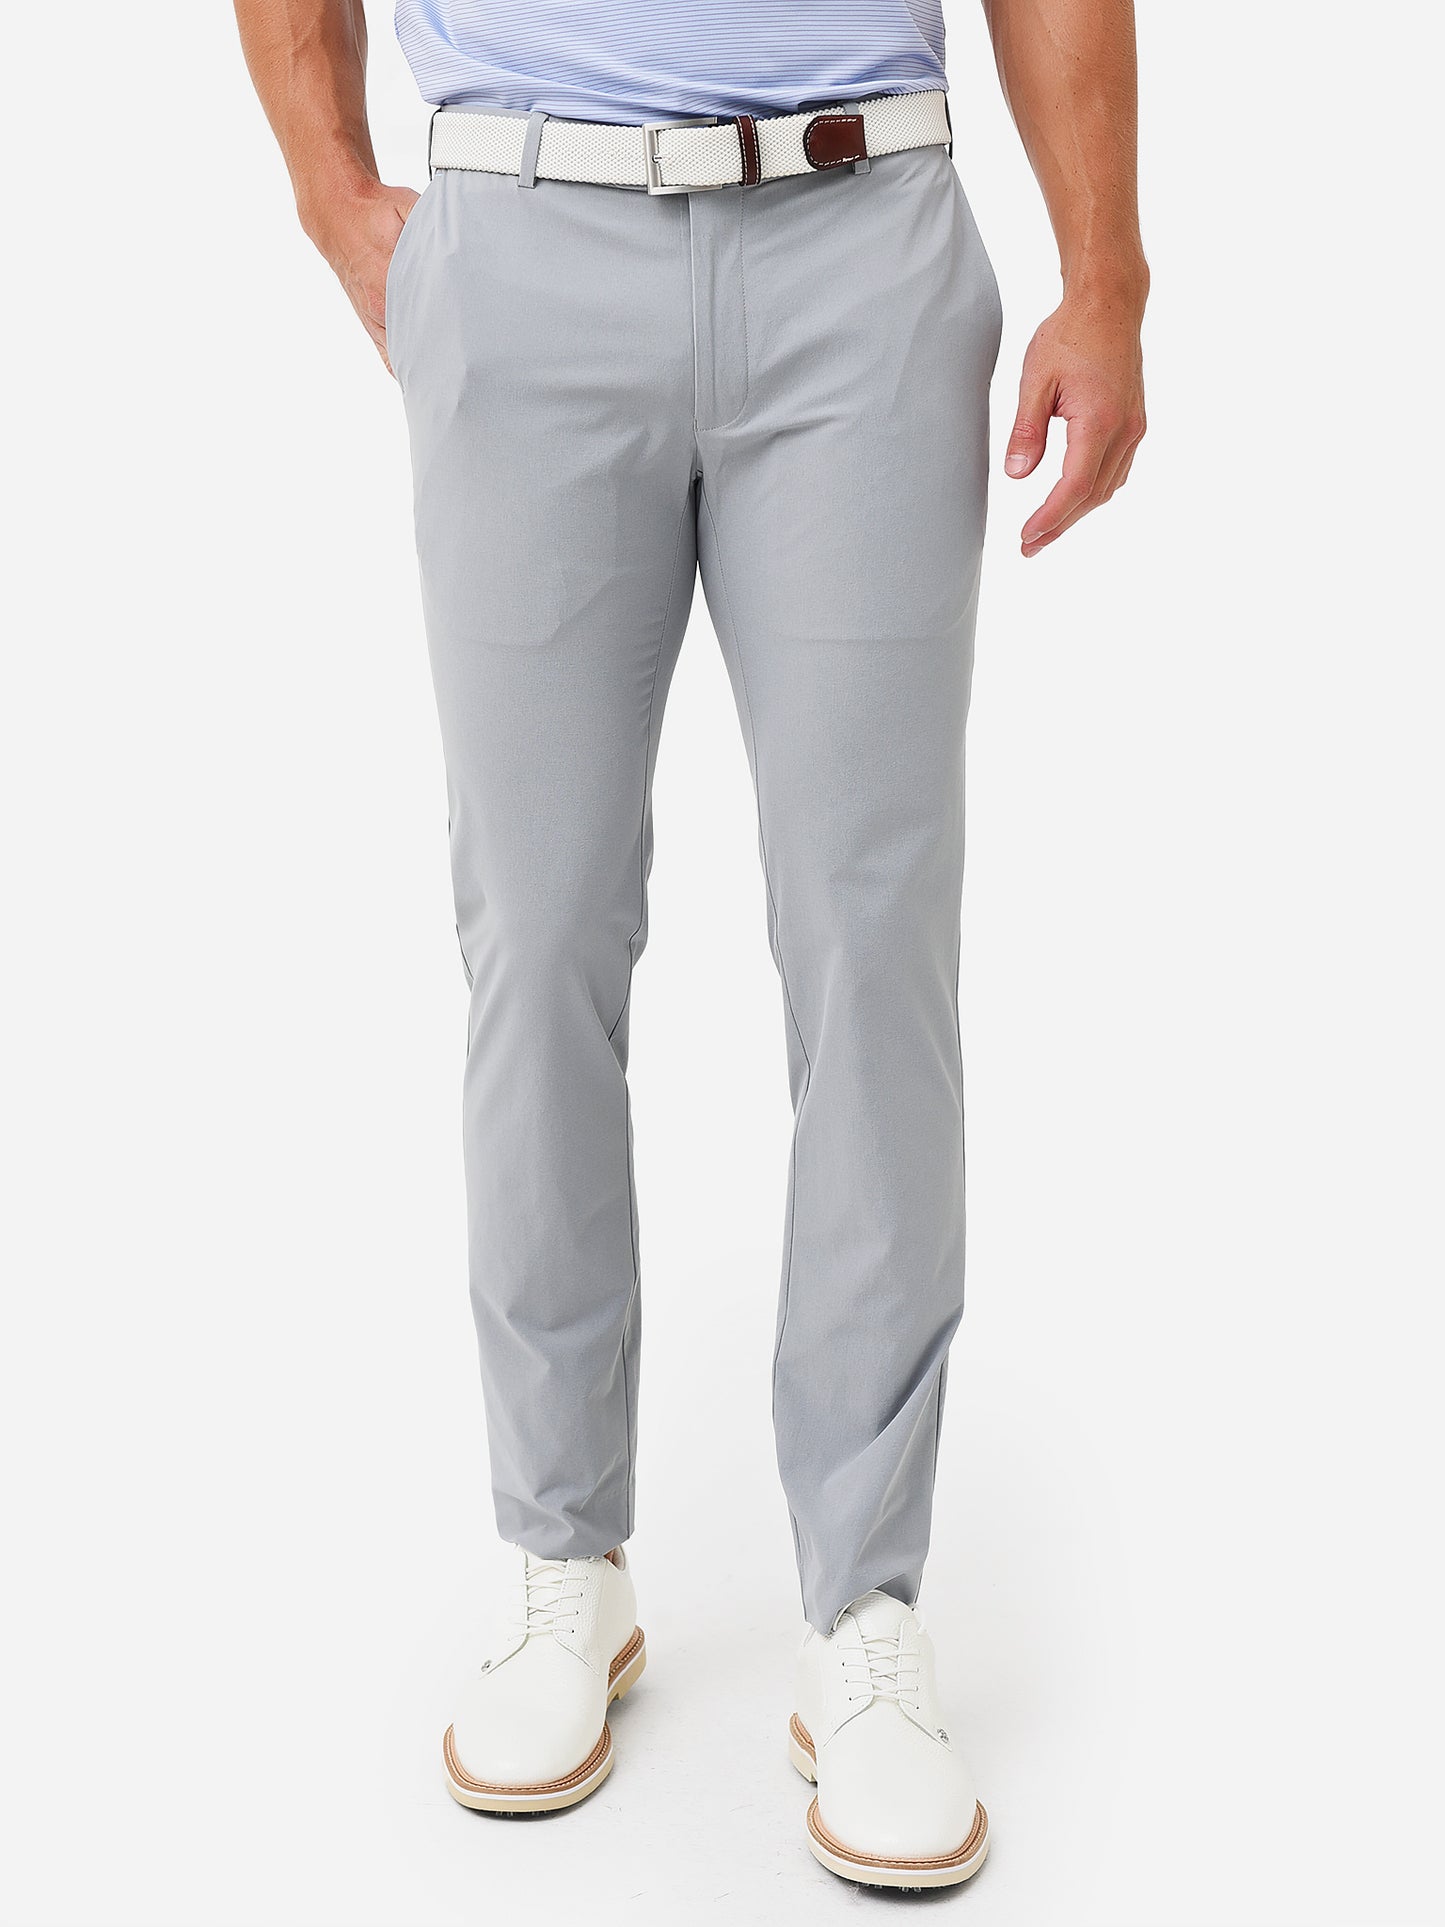 Peter Millar Crown Sport 5-Pocket Performance Golf Pants 32 x 32 Gray  Stains - Simpson Advanced Chiropractic & Medical Center